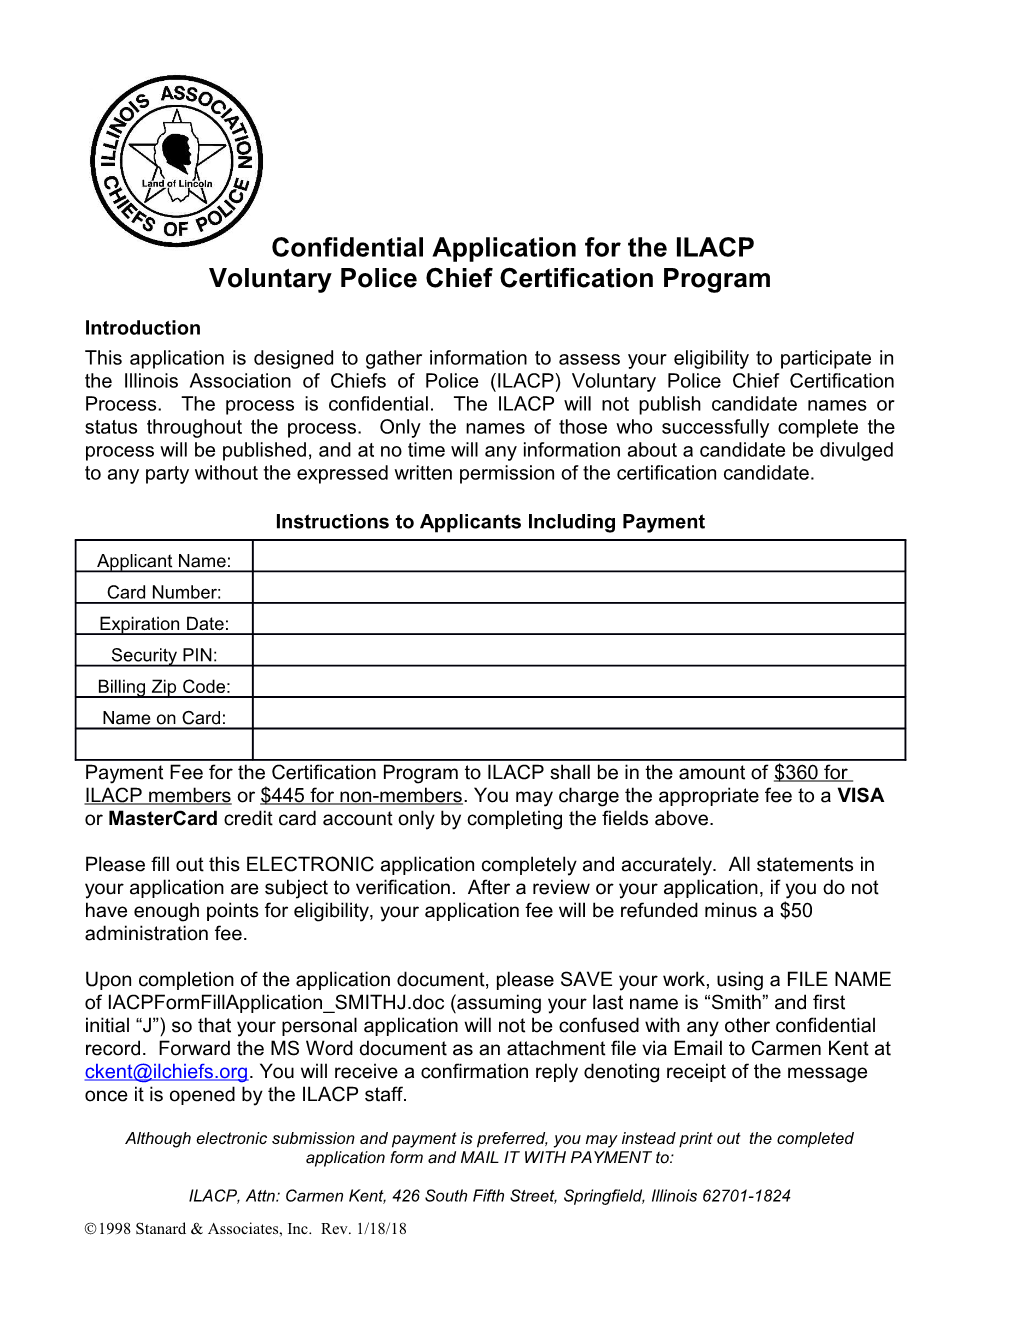 Confidential Application for the IACP